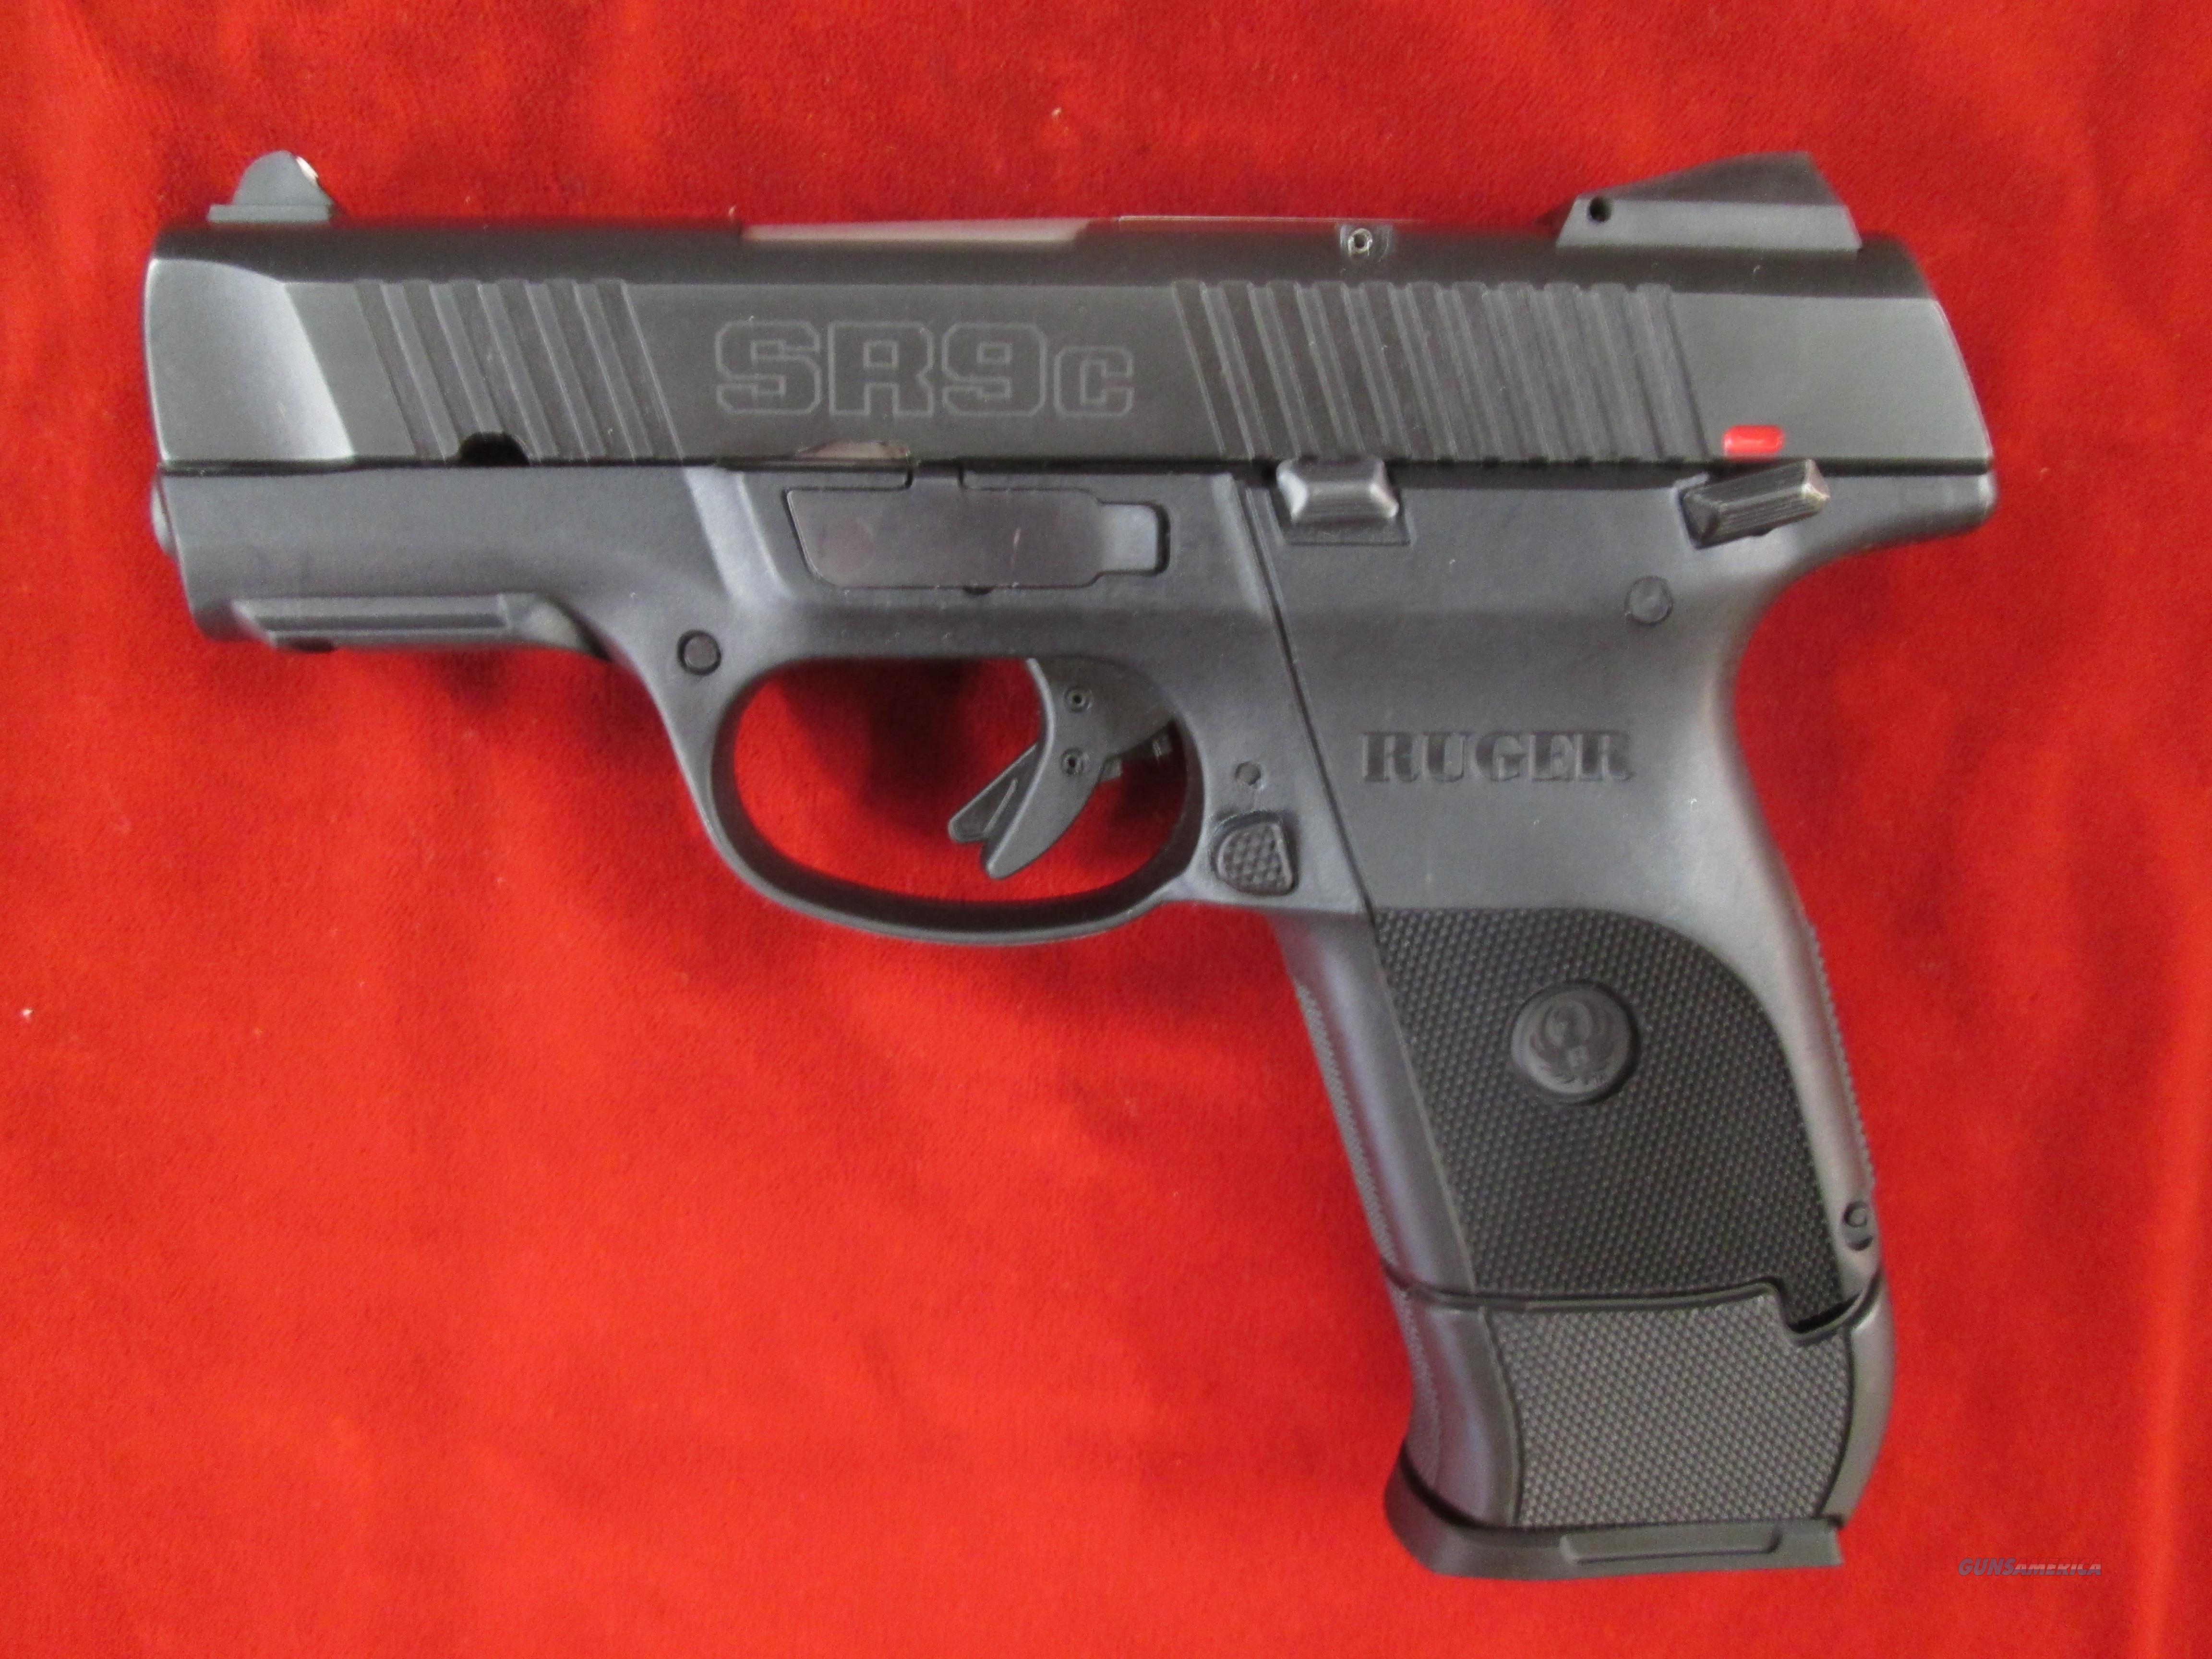 Ruger Sr9c Compact 9mm Black Used For Sale At 905282544 7811